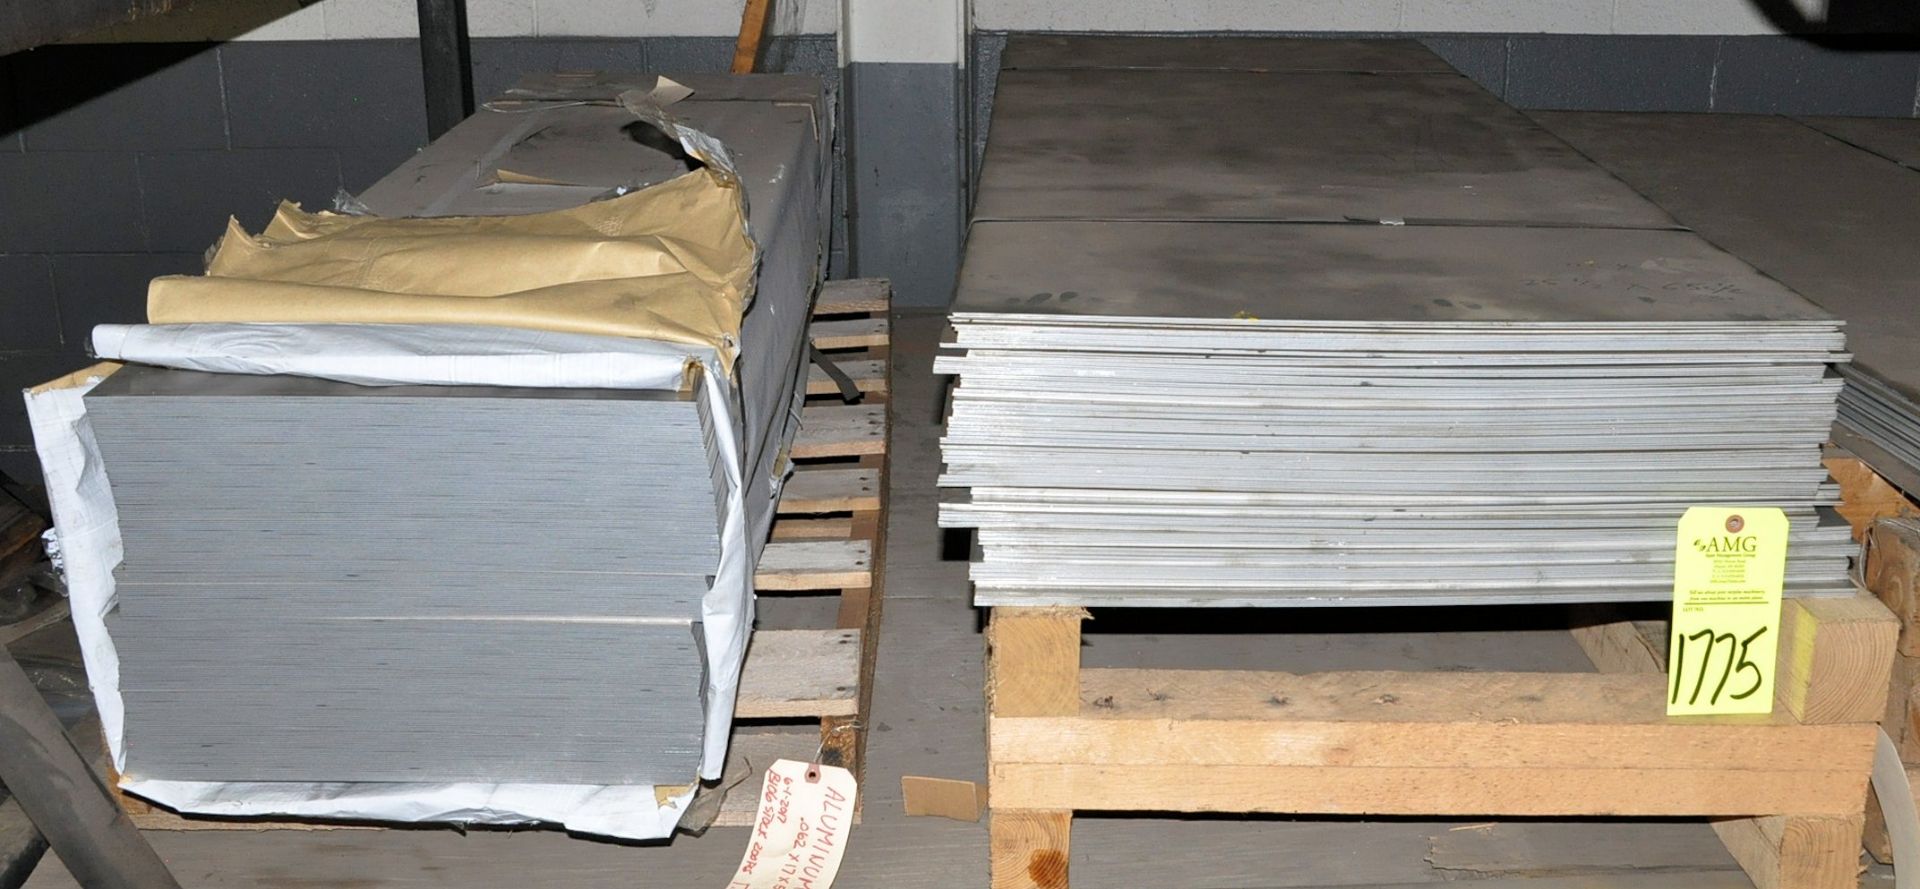 Lot-Aluminum .037, .039, .054, and .062 Sheet Metal Stock on (4) Pallets on 4th Shelf, (Warehouse - Image 2 of 4